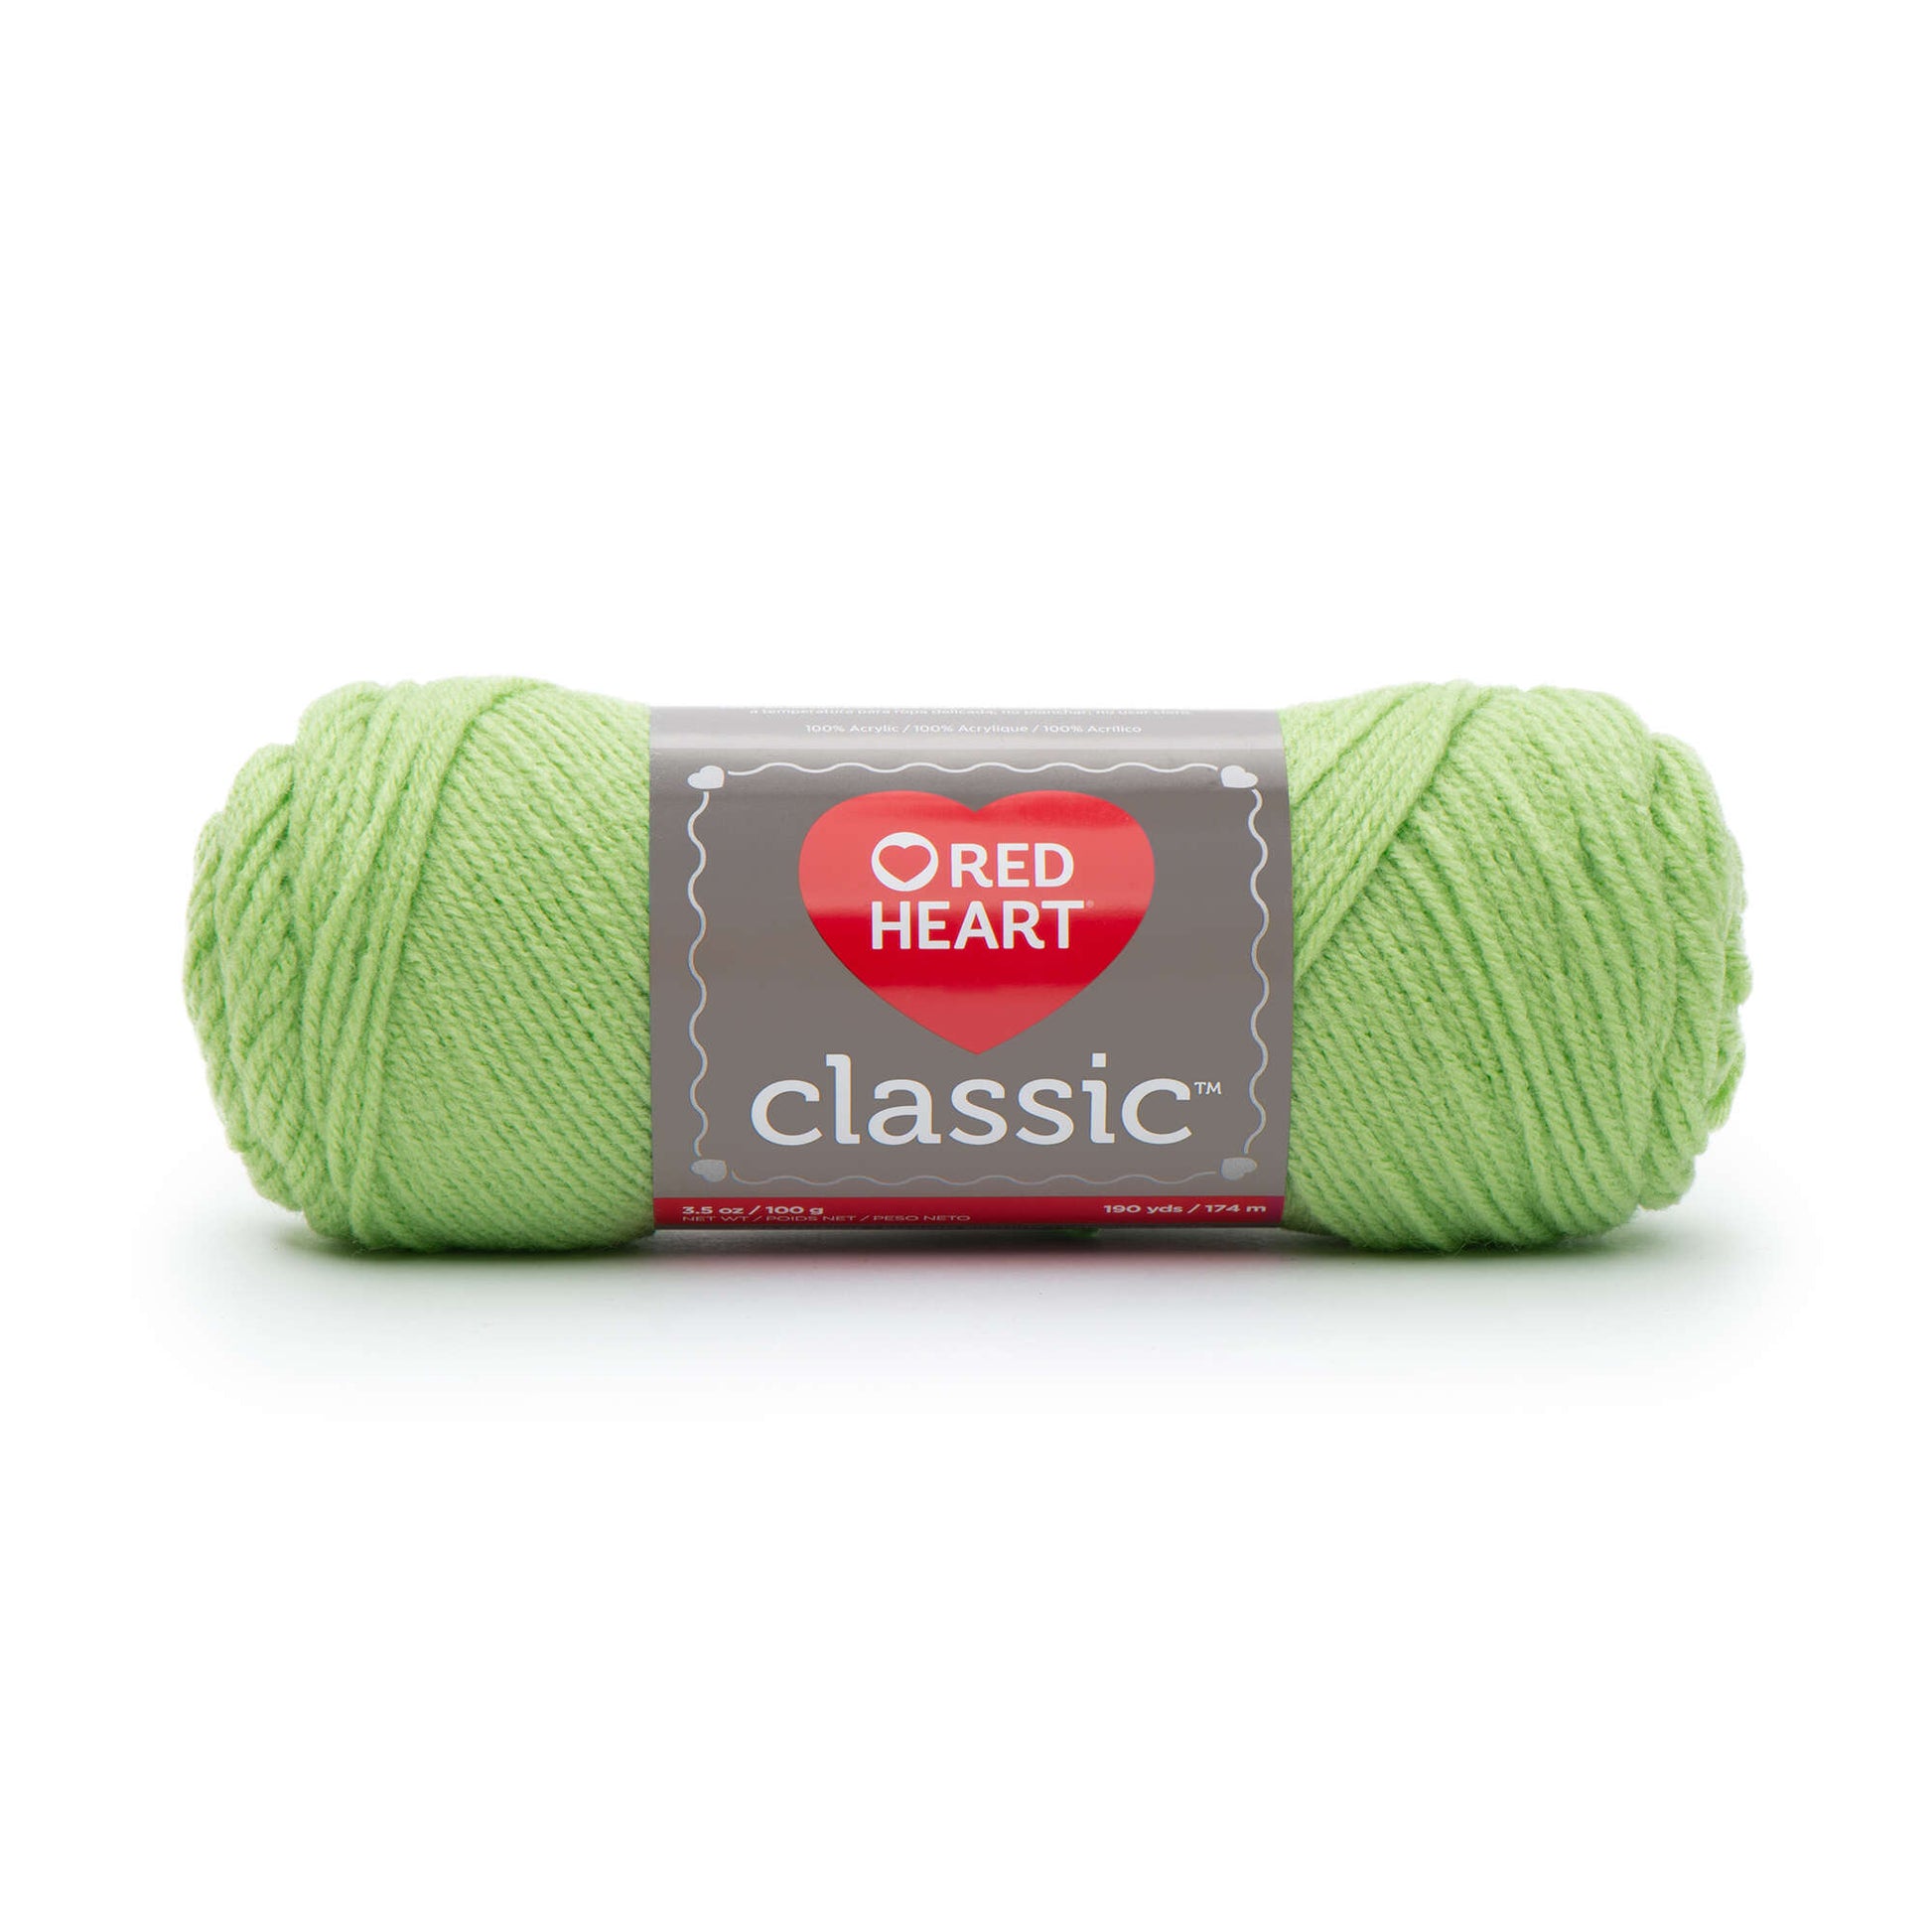 Red Heart Classic Yarn - Clearance shades Lime